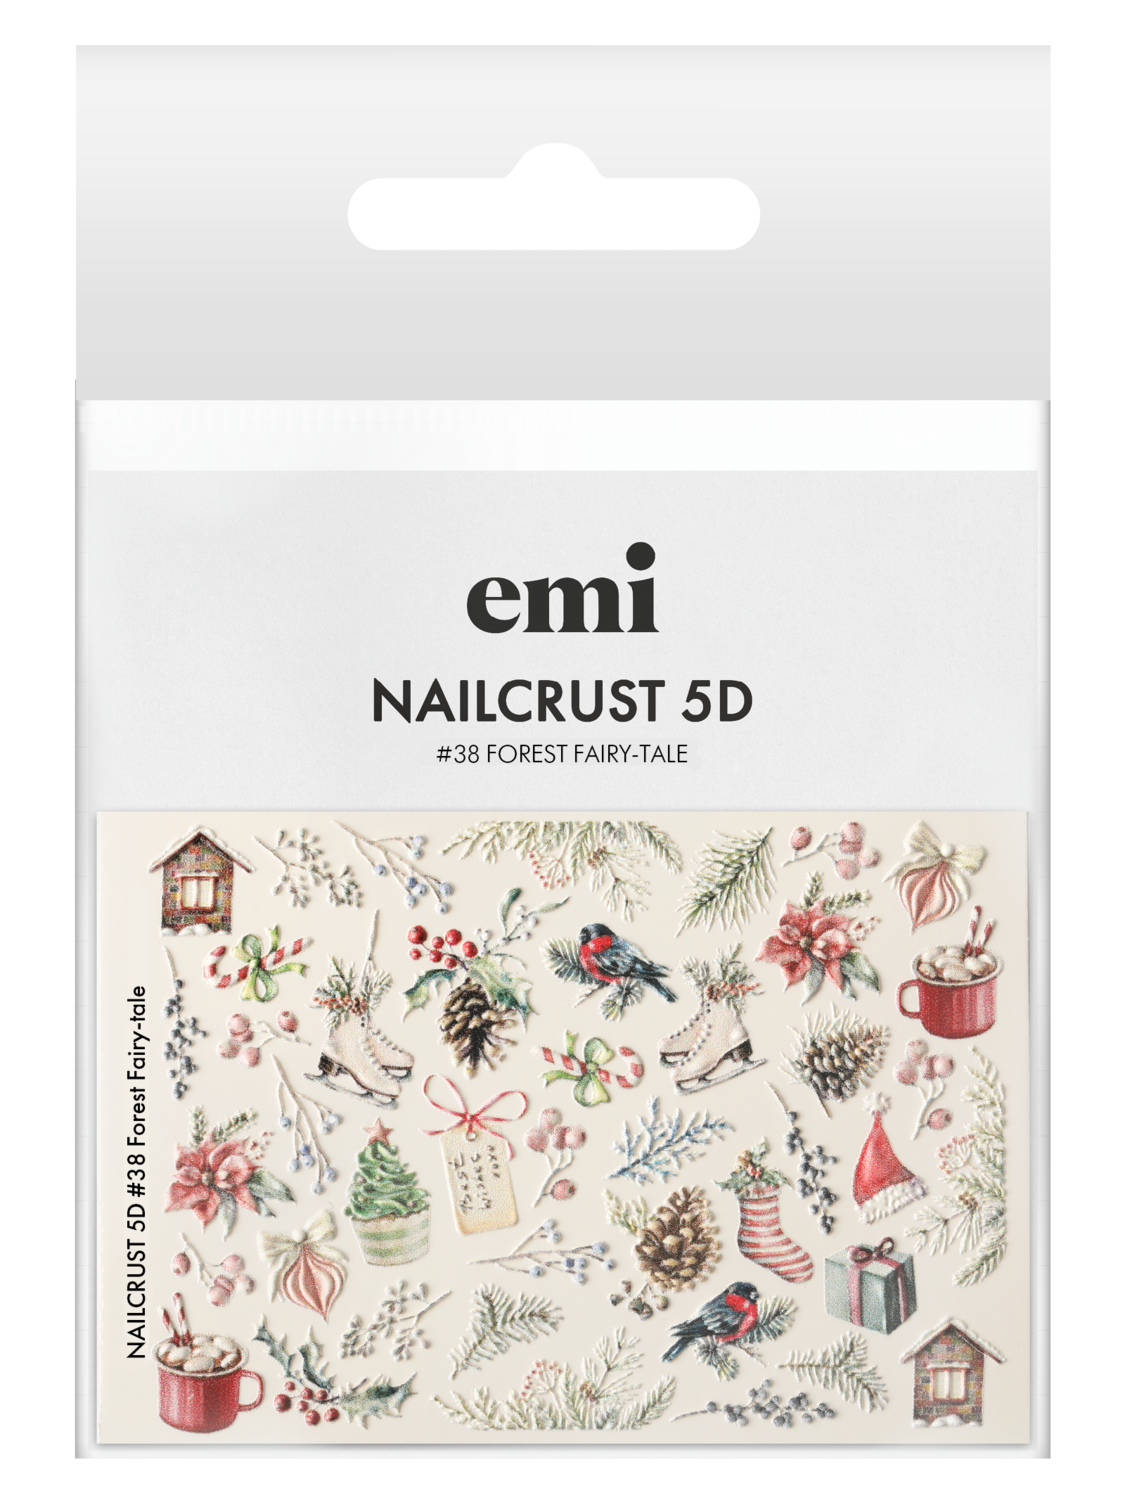 NAILCRUST 5D #38 Forest Fairy-tale